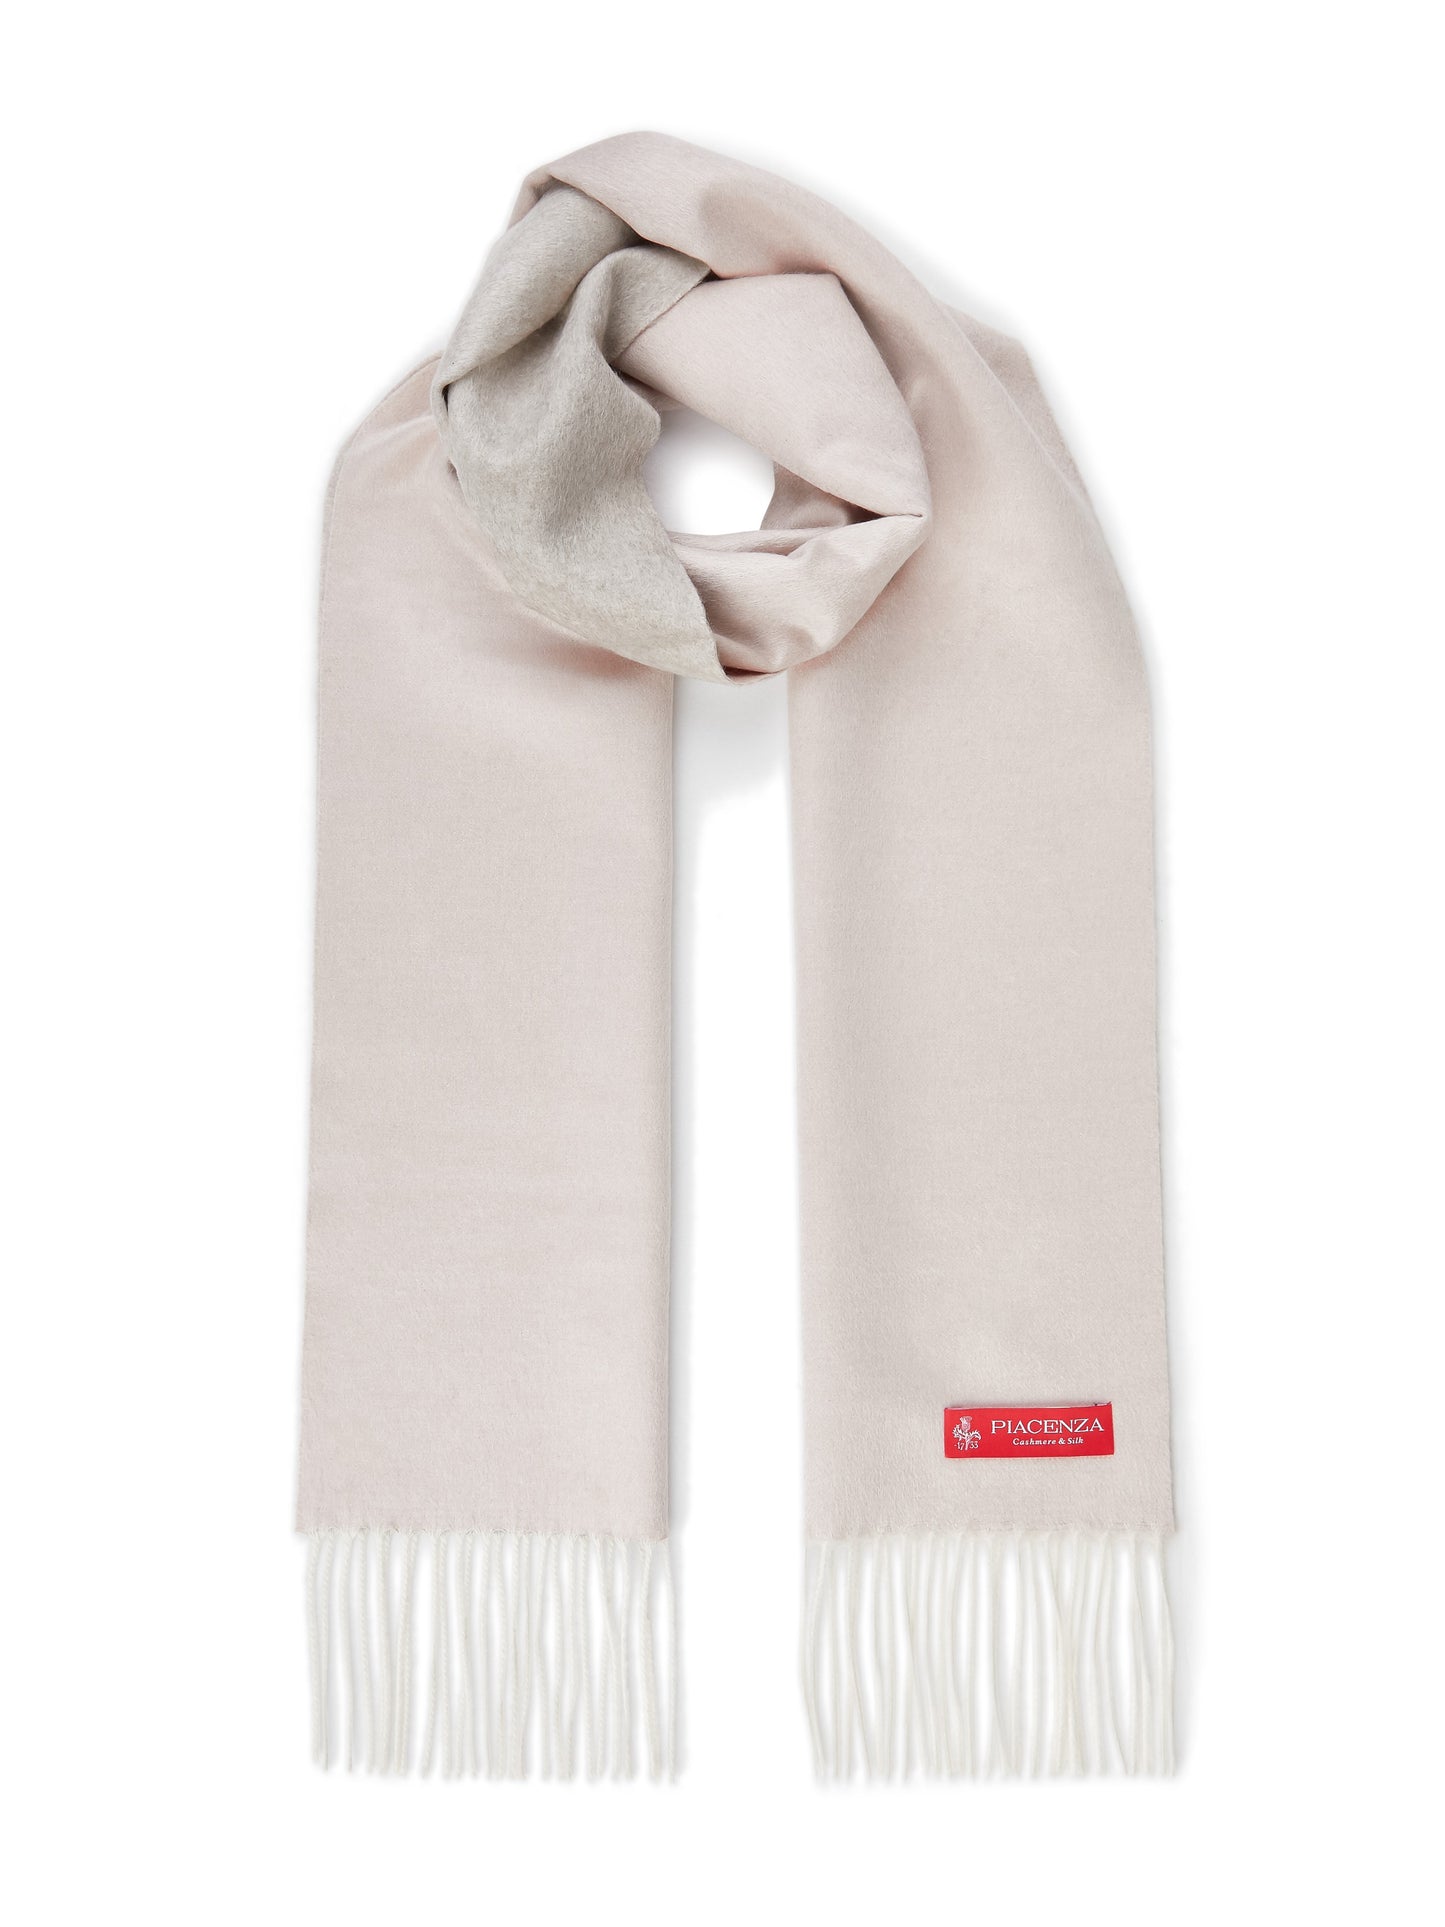 MIRROR - Two-tone pink gray silk cashmere scarf